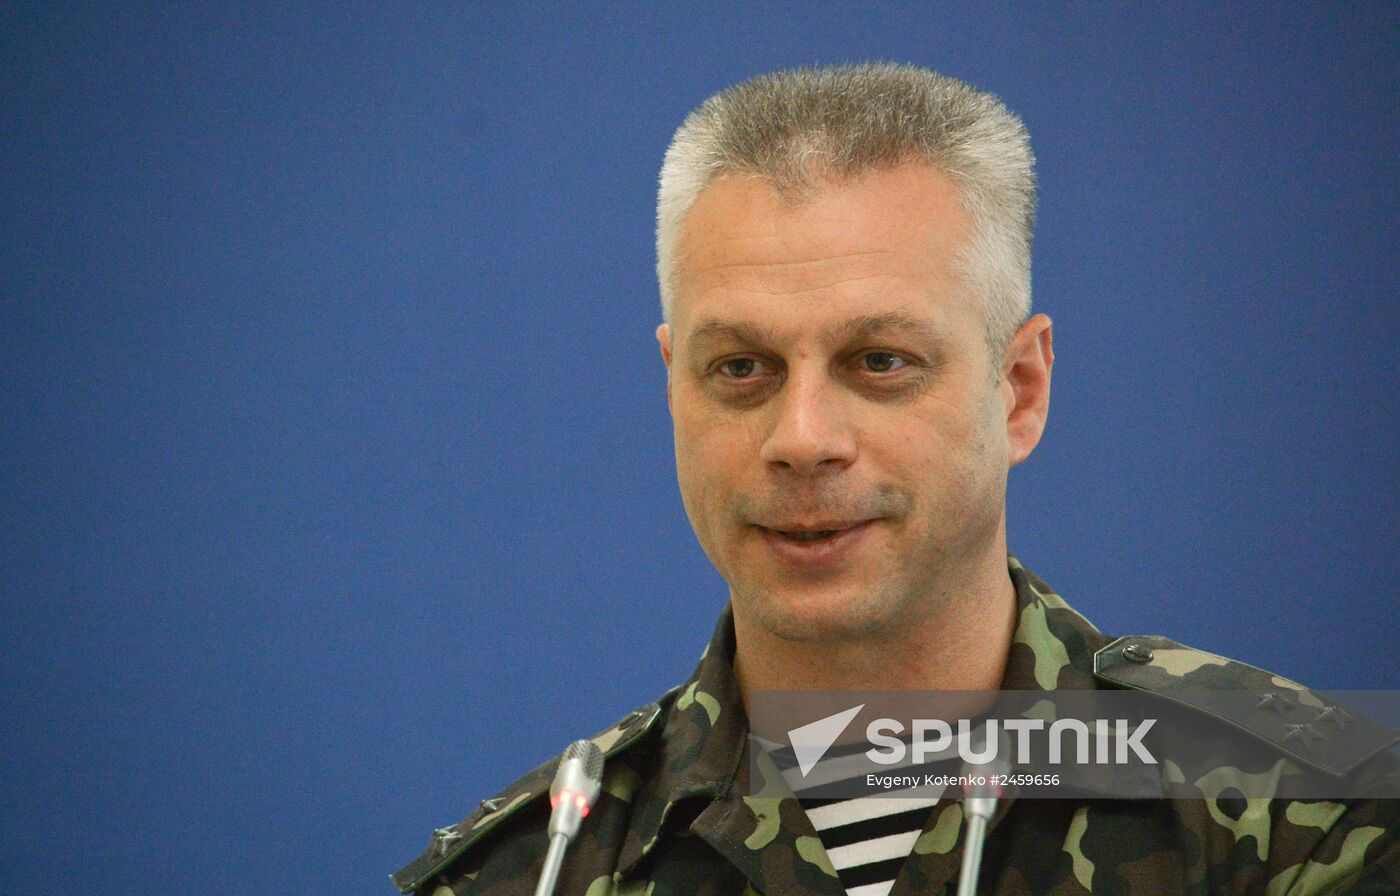 Ukrainian National Security and Defense Council's Information Center holds press briefing